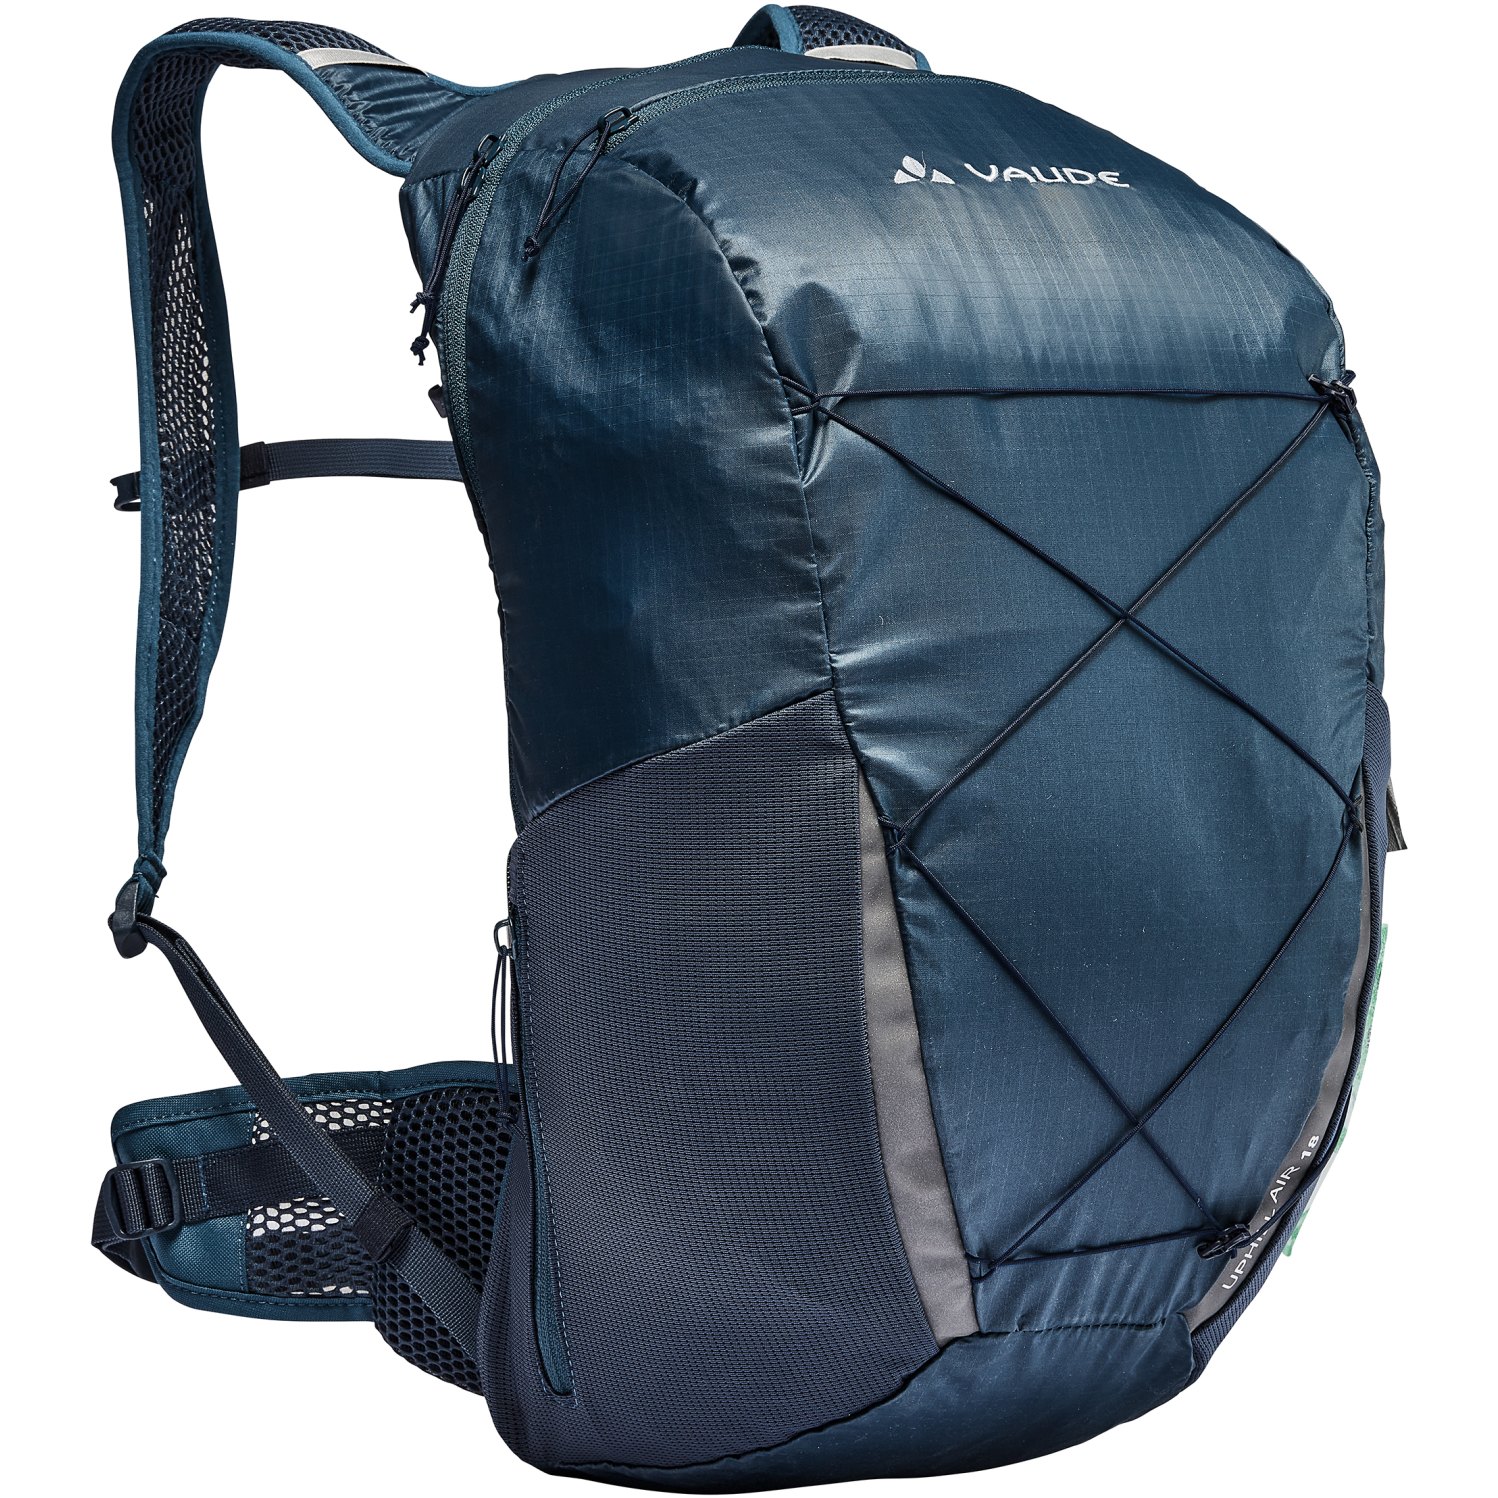 Picture of Vaude Uphill Air 18 Backpack - baltic sea